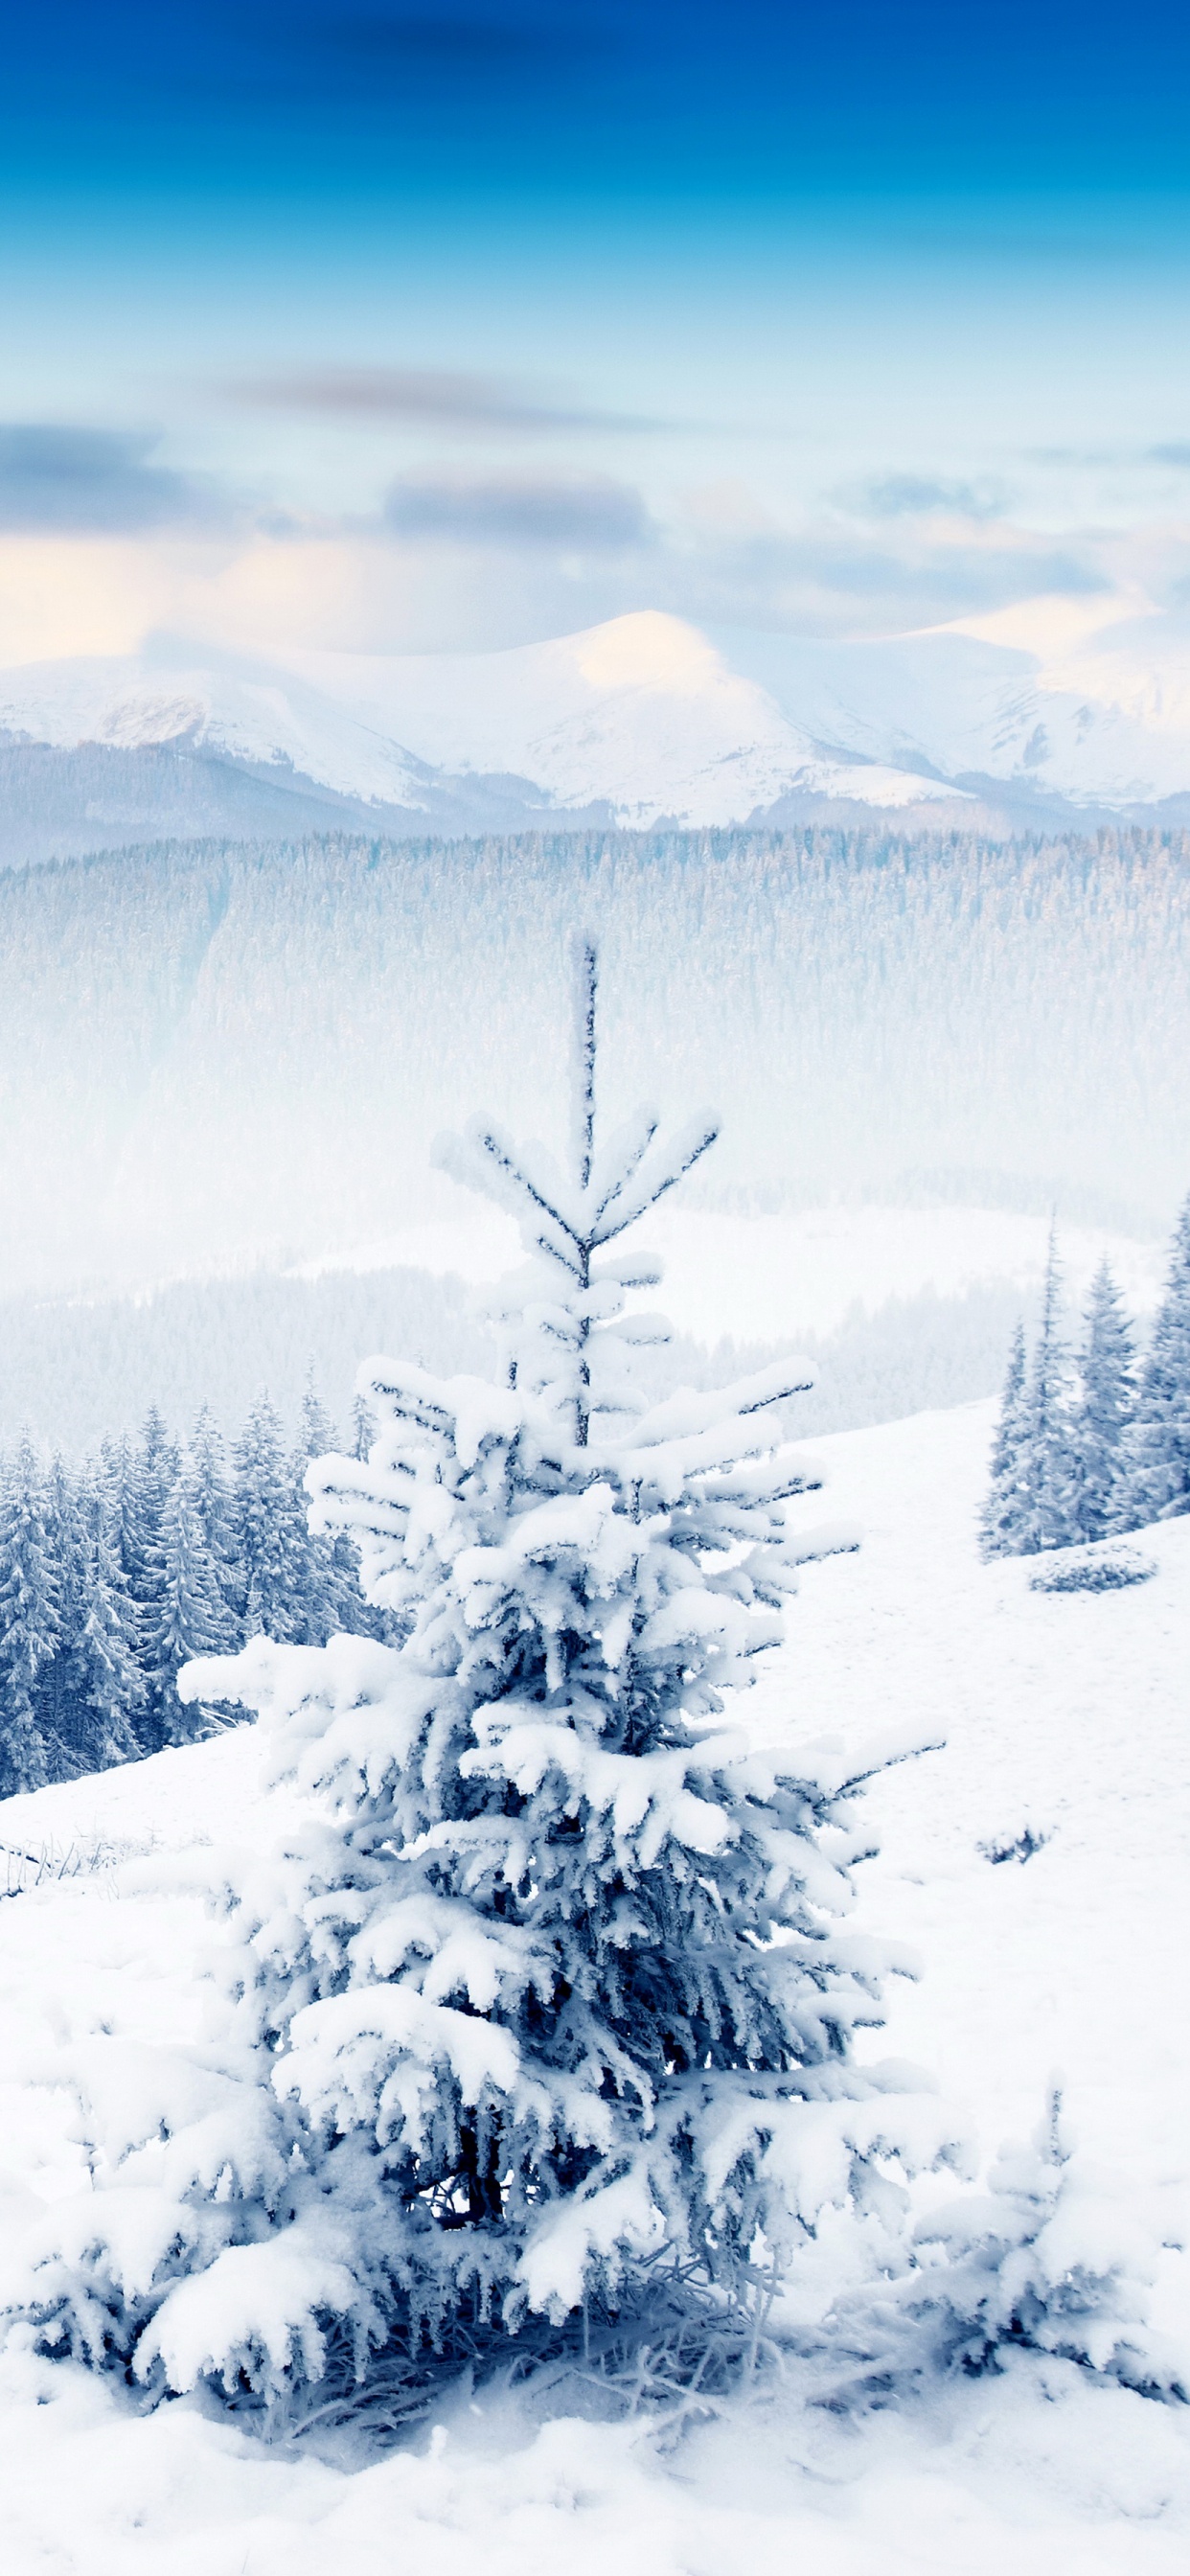 Snow Covered Pine Trees and Mountains During Daytime. Wallpaper in 1242x2688 Resolution